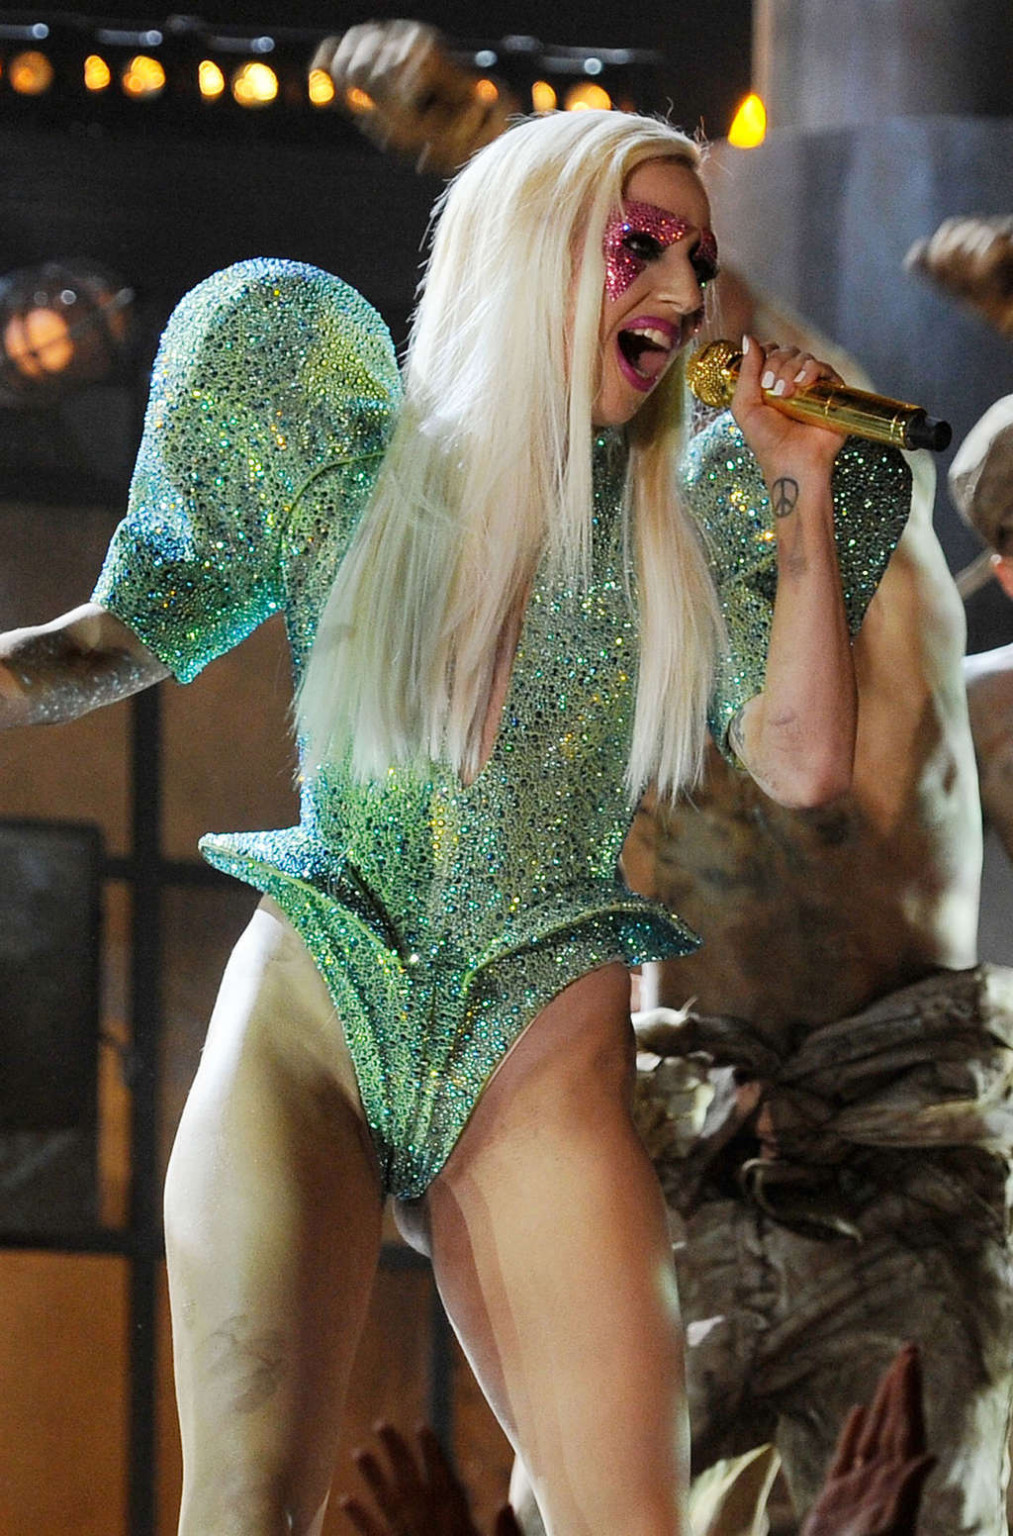 Lady Gaga exposing her nice ass in sexy outfit on stage #75360779